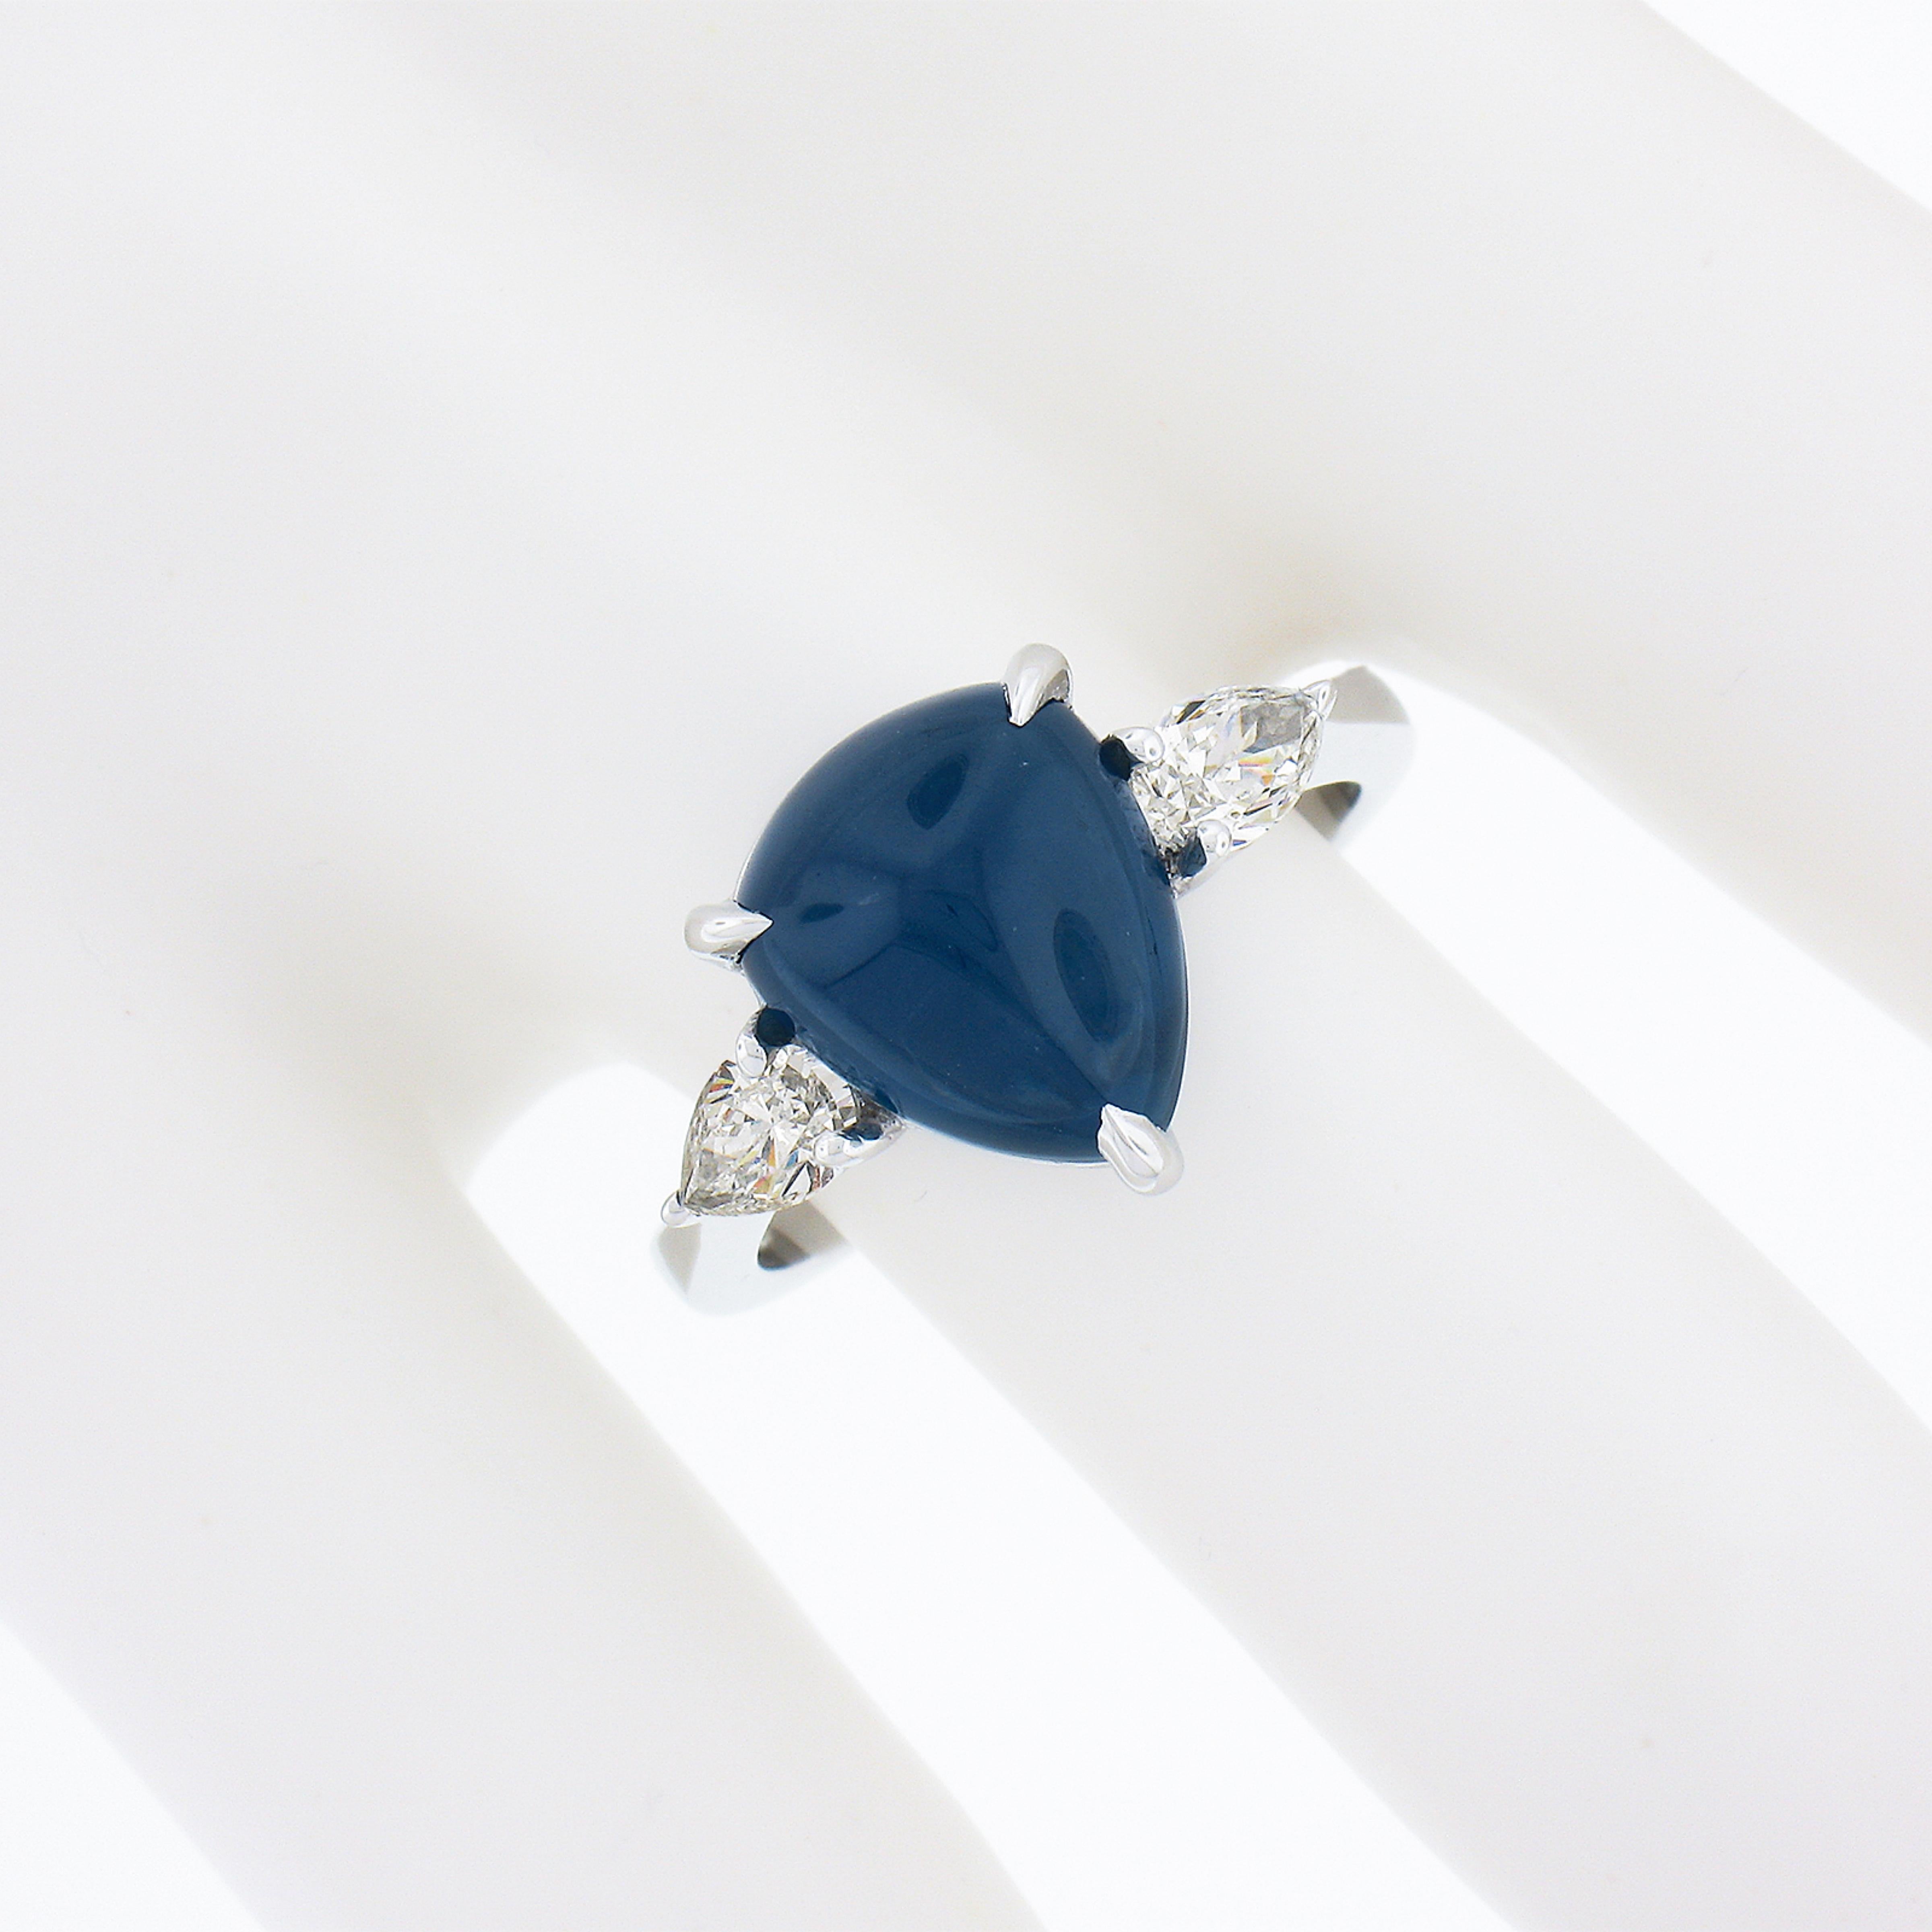 New Platinum Gubelin 5.63ct Triangle Cabochon Sapphire Pear Diamond 3 Stone Ring In New Condition For Sale In Montclair, NJ